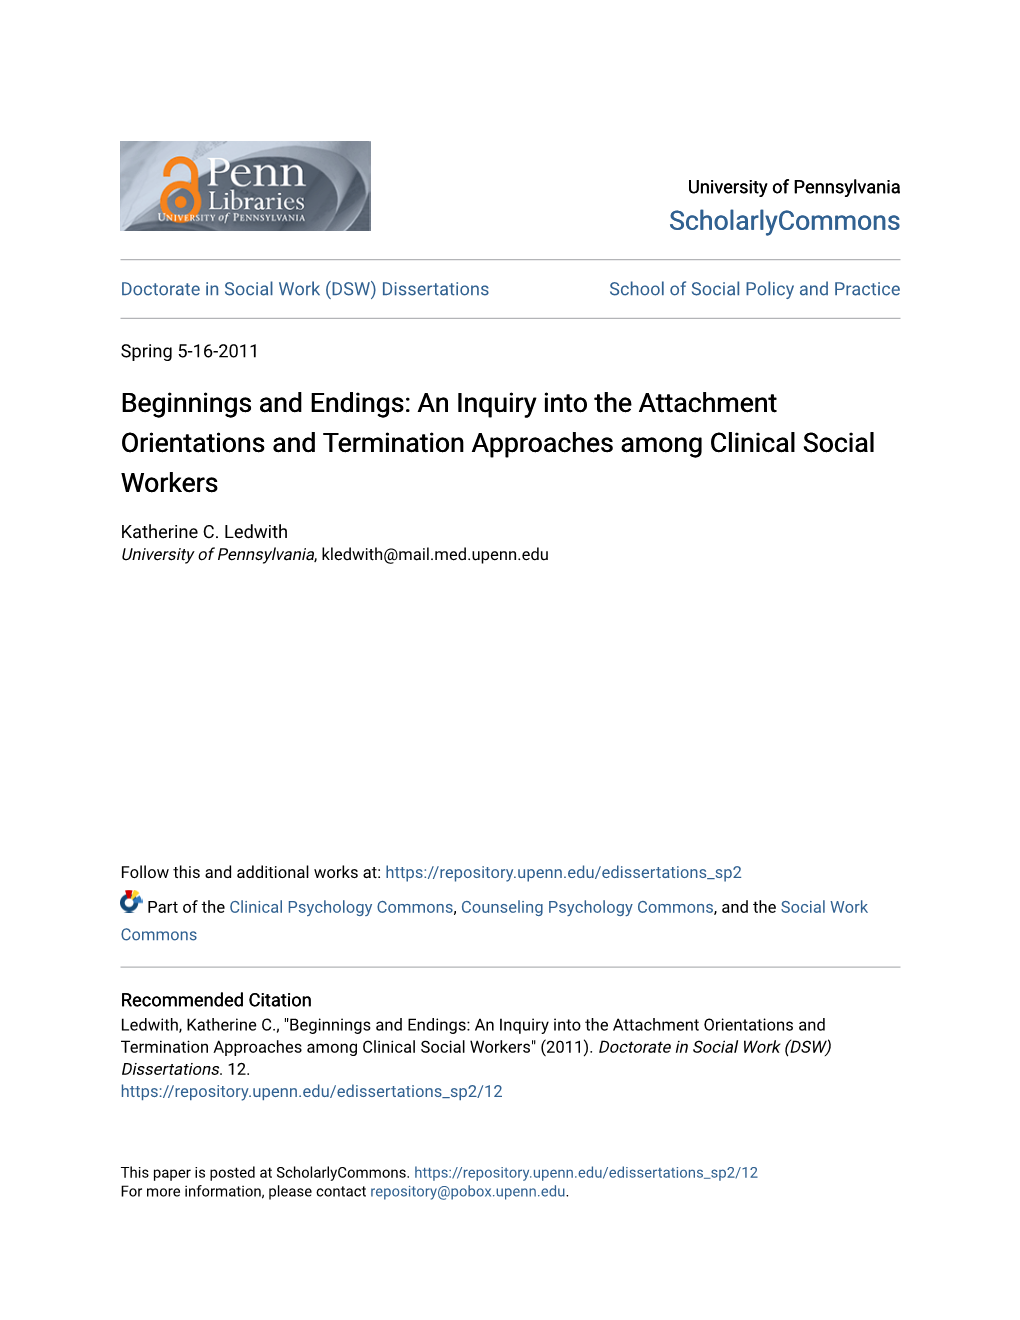 Beginnings and Endings: an Inquiry Into the Attachment Orientations and Termination Approaches Among Clinical Social Workers